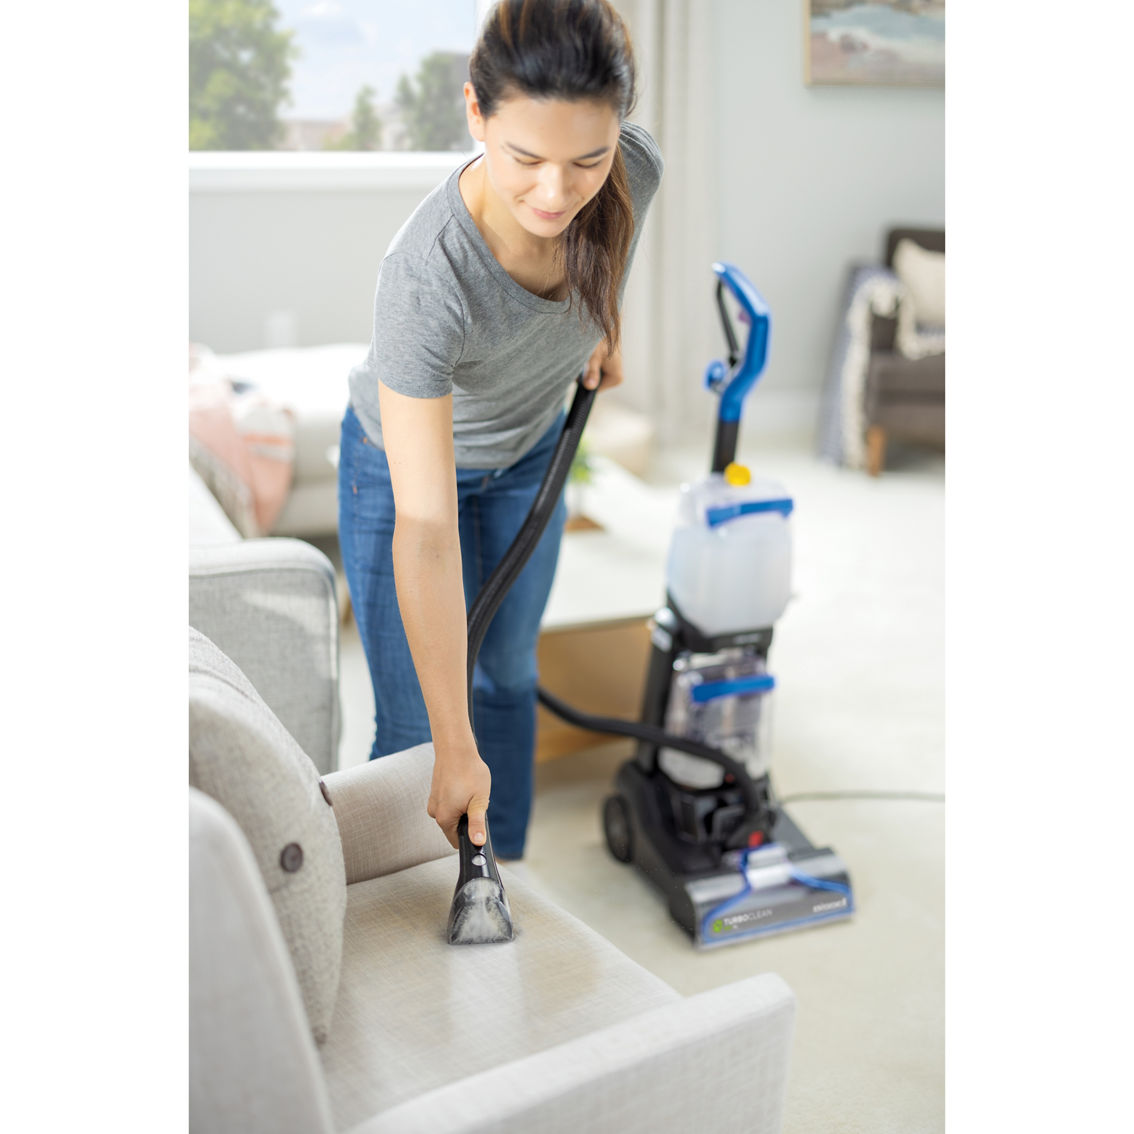 Bissell TurboClean Dual Pro Pet Upright Deep Cleaner - Image 6 of 8